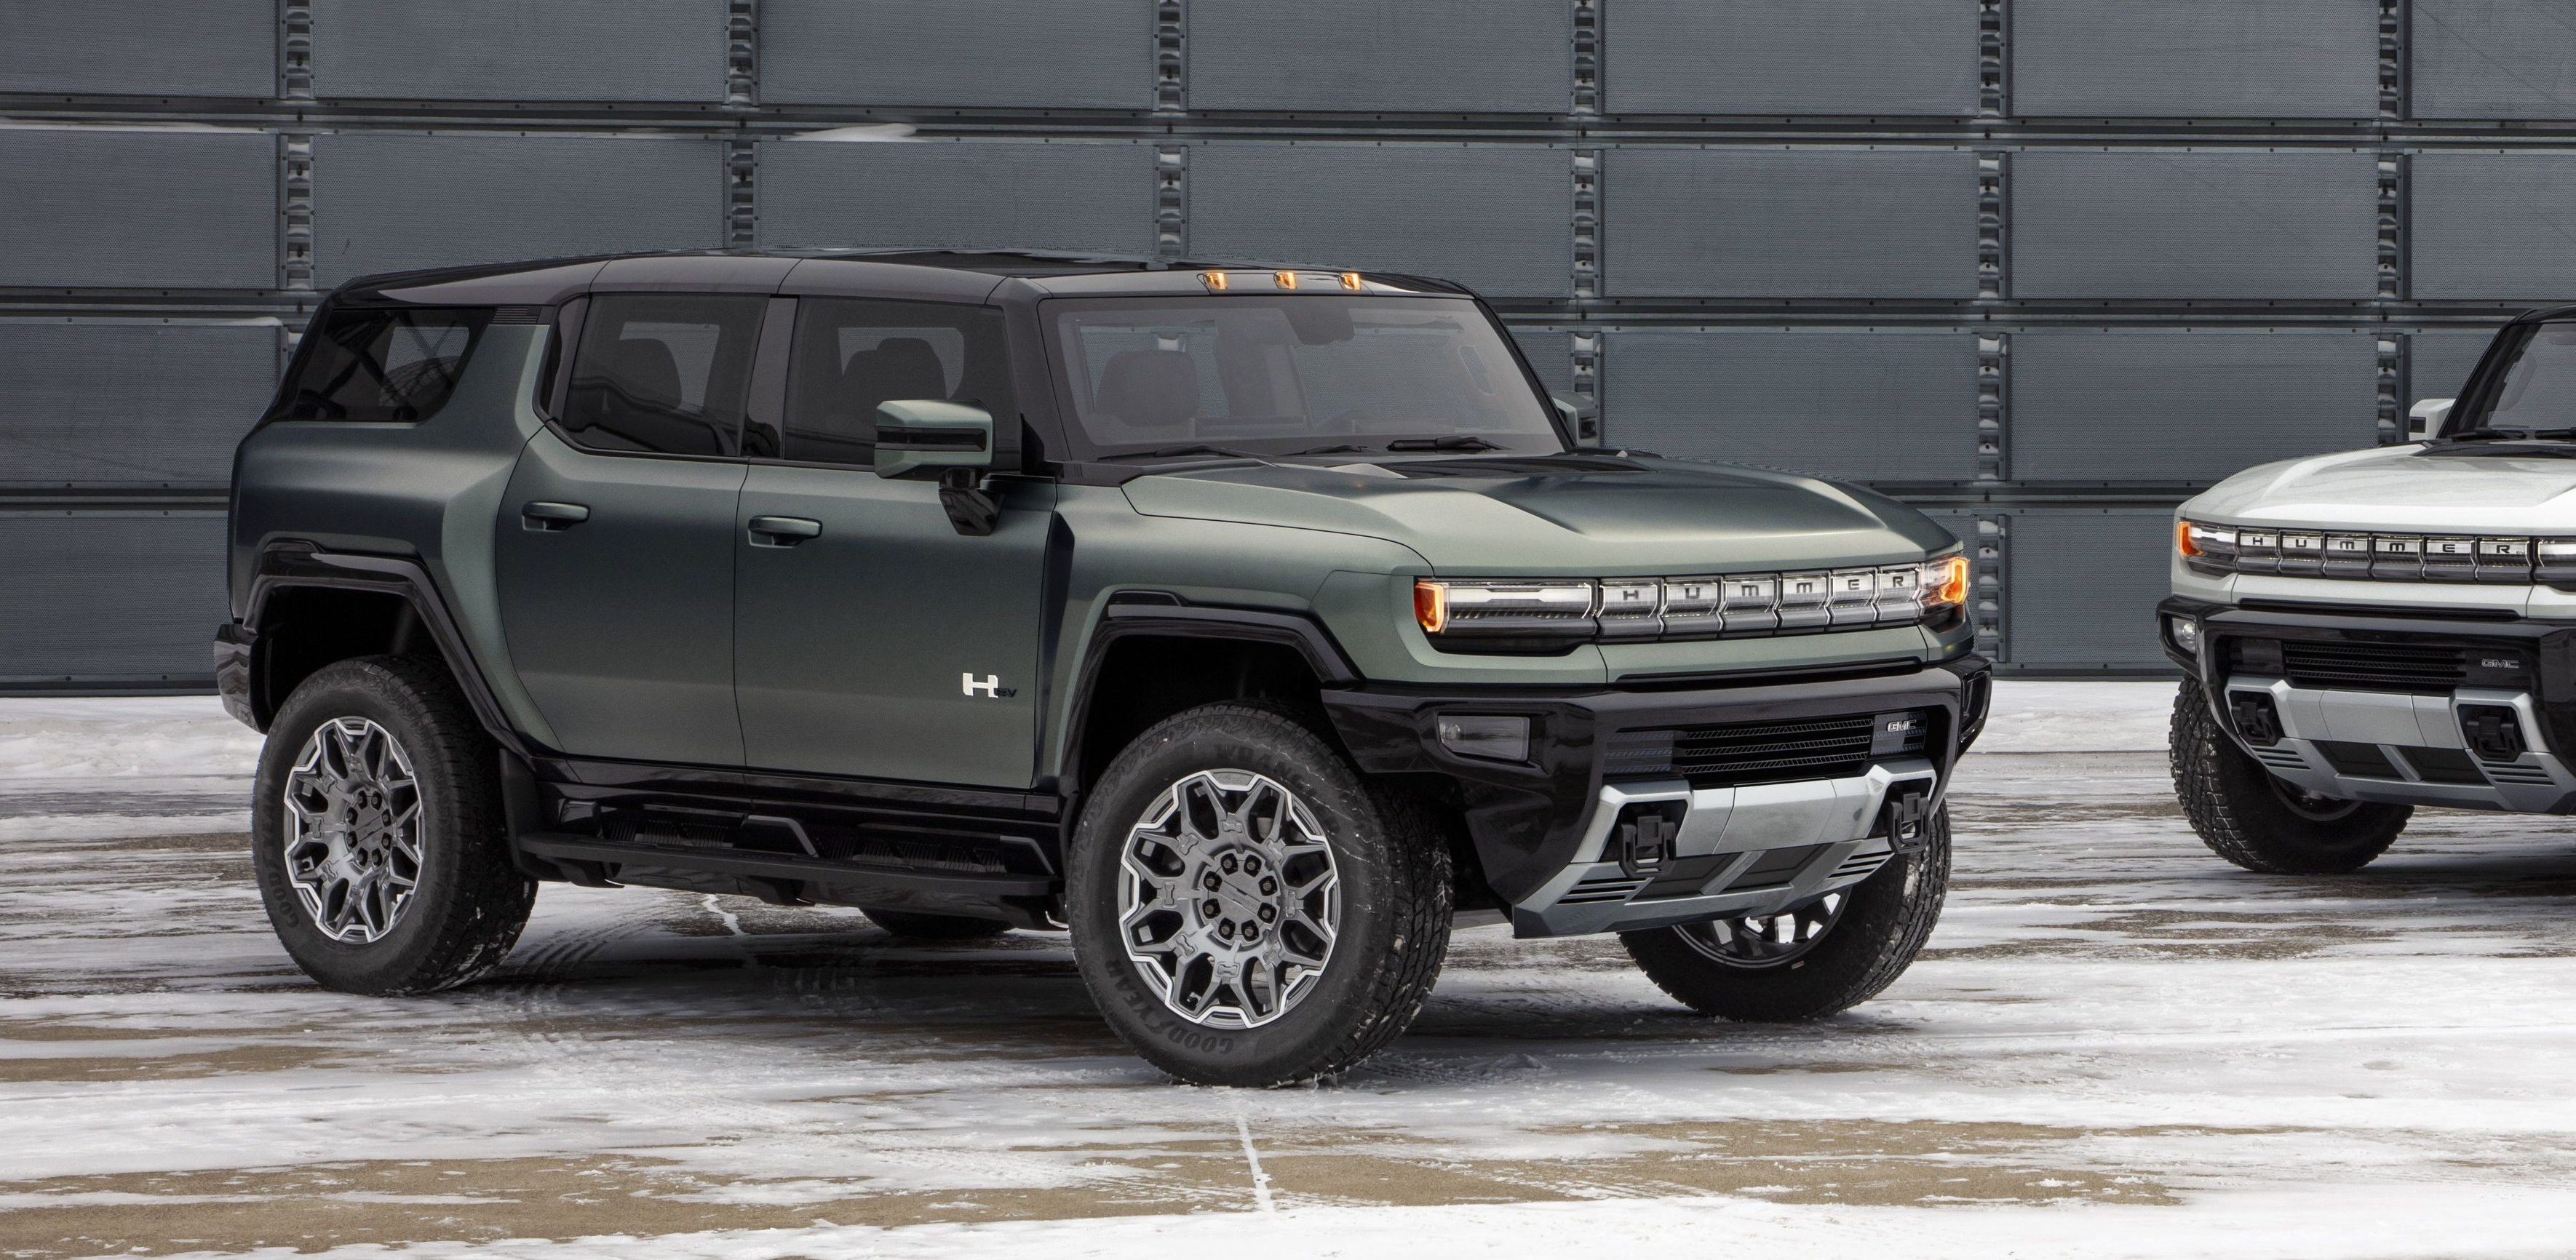 GM unveils Hummer EV SUV version starting at 80,000, but it is going